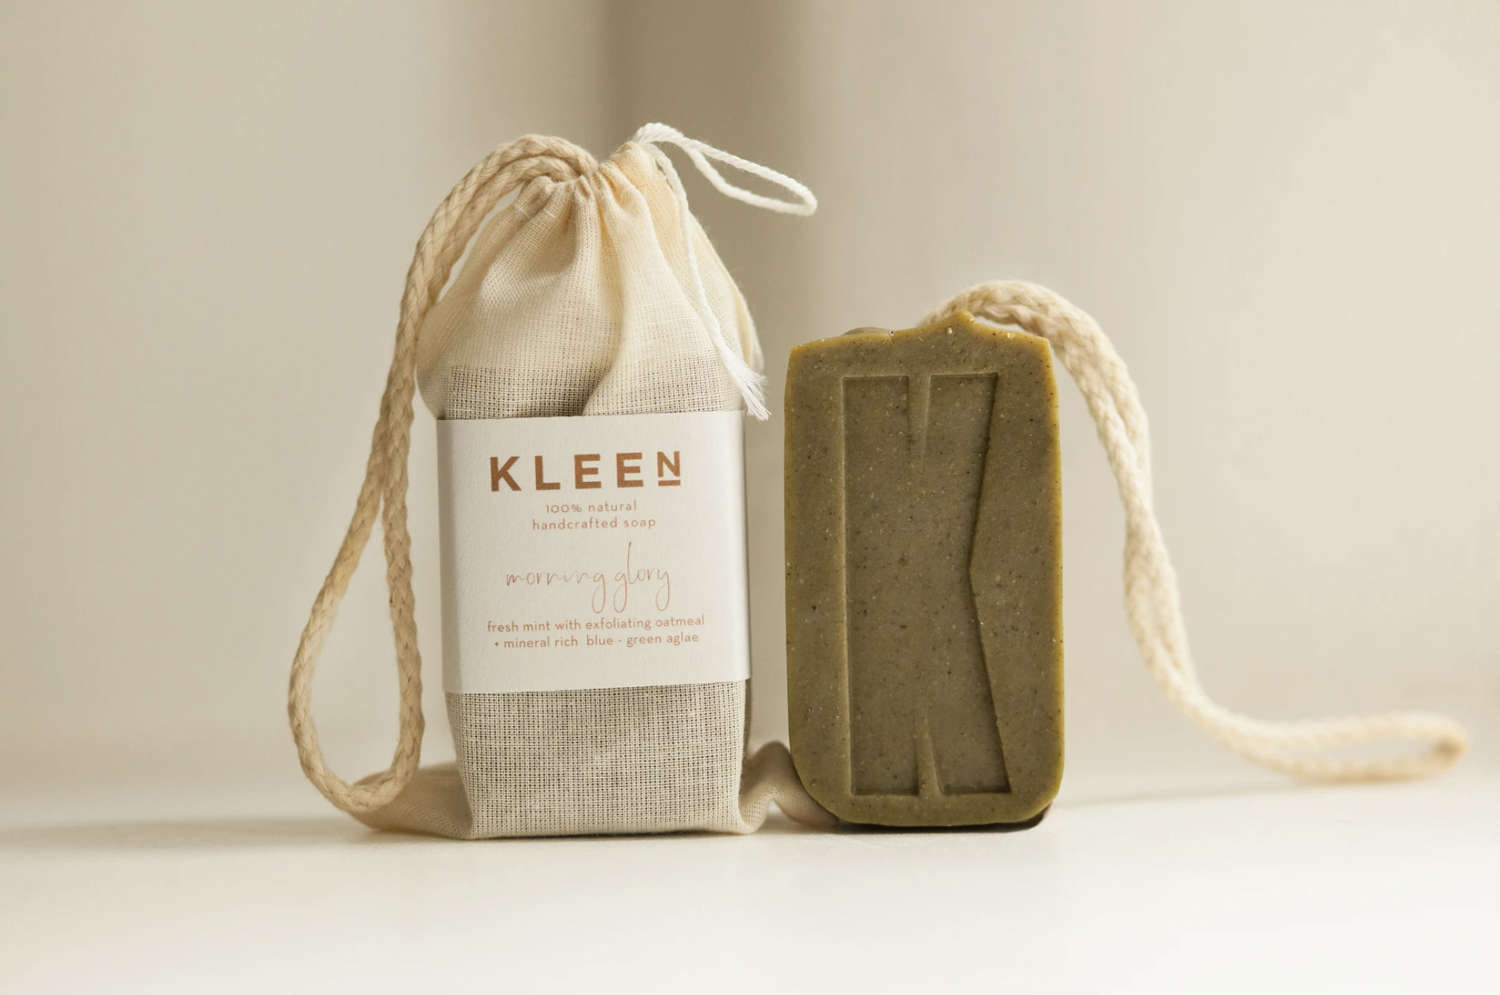 Morning Glory - Kleen 100% Natural handcrafted soap on a rope - 160g